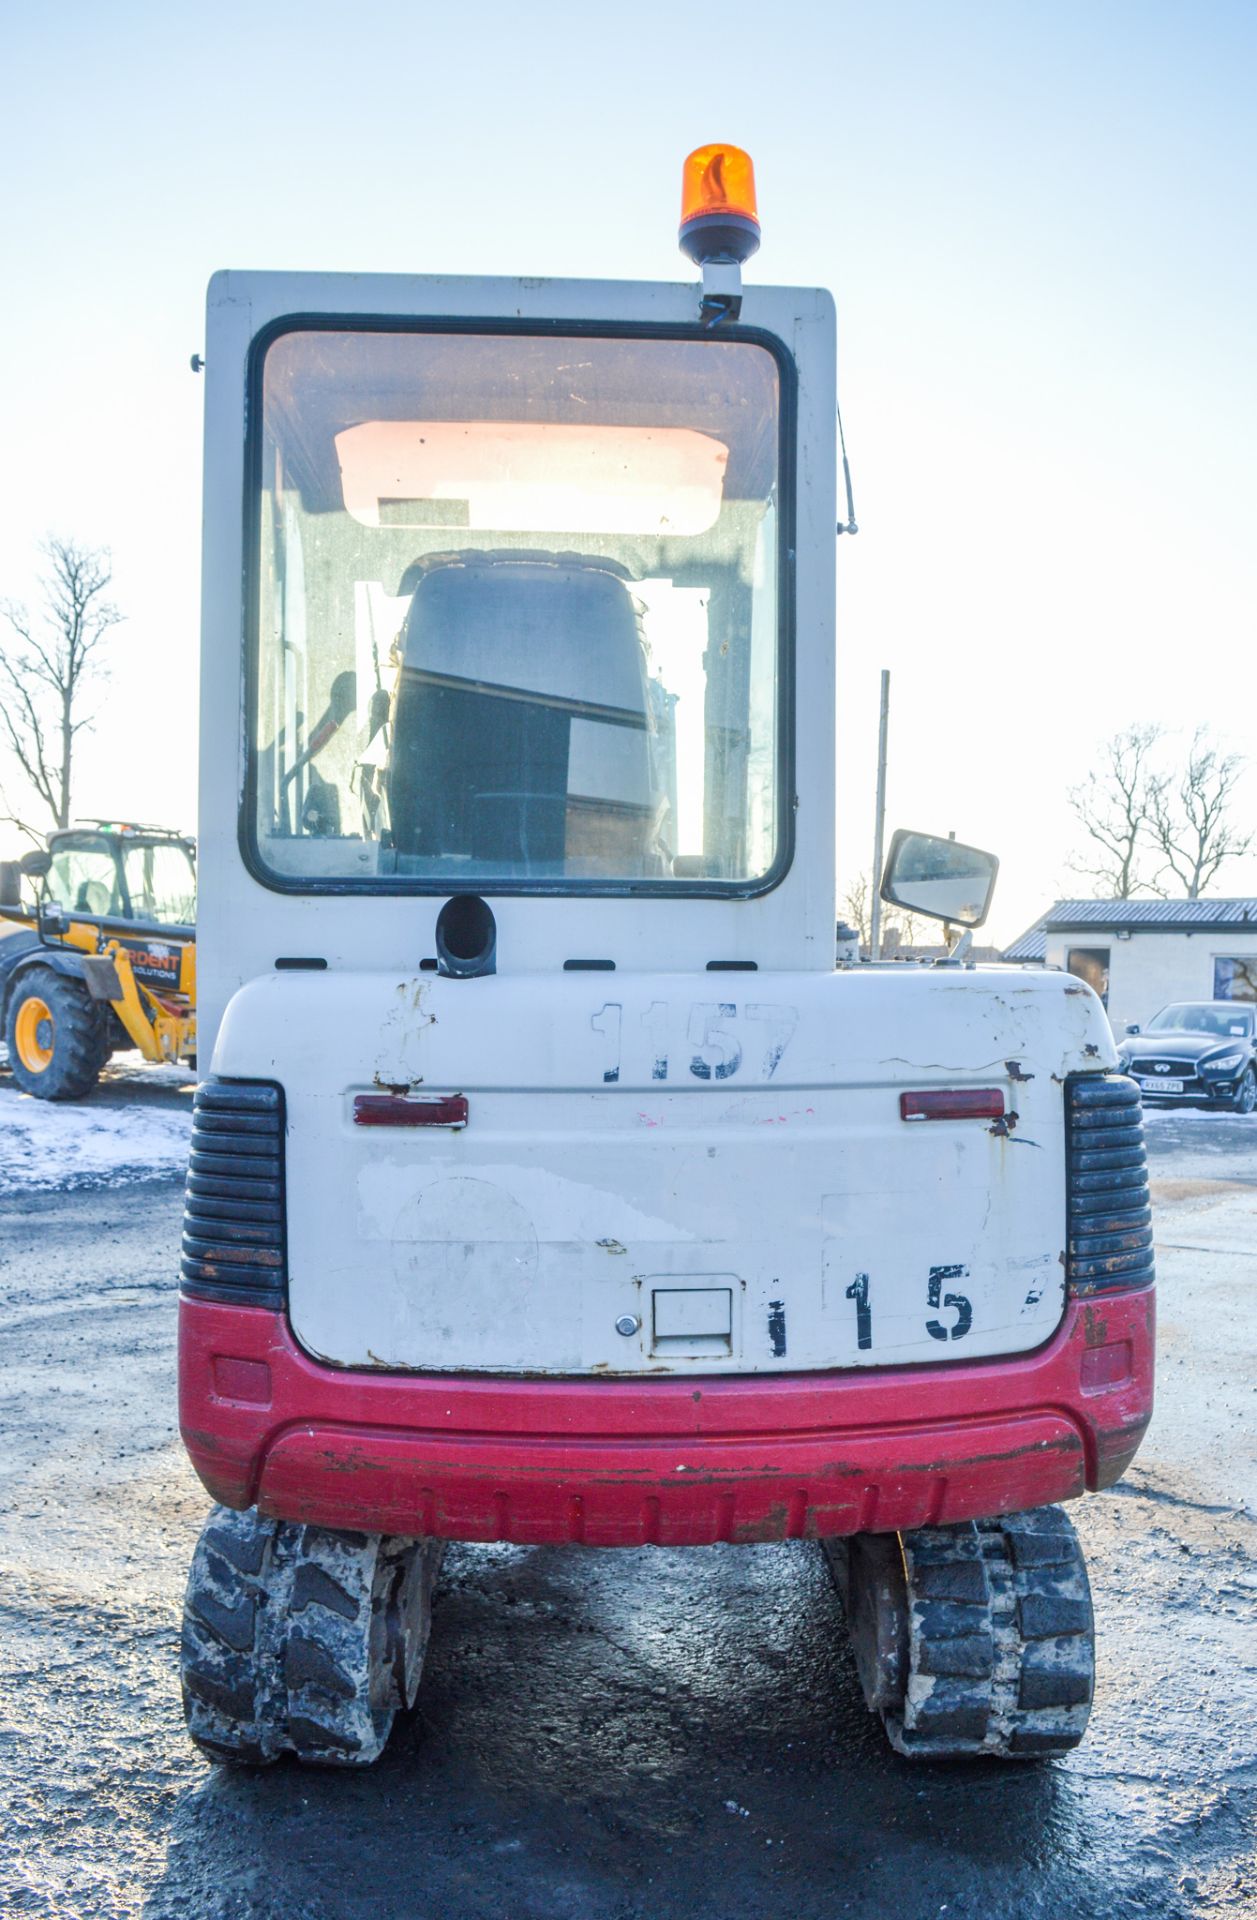 Takeuchi TB125 2.5 tonne rubber tracked mini excavator Year: 2008 S/N: 12519500 Recorded hours: 5737 - Image 6 of 11